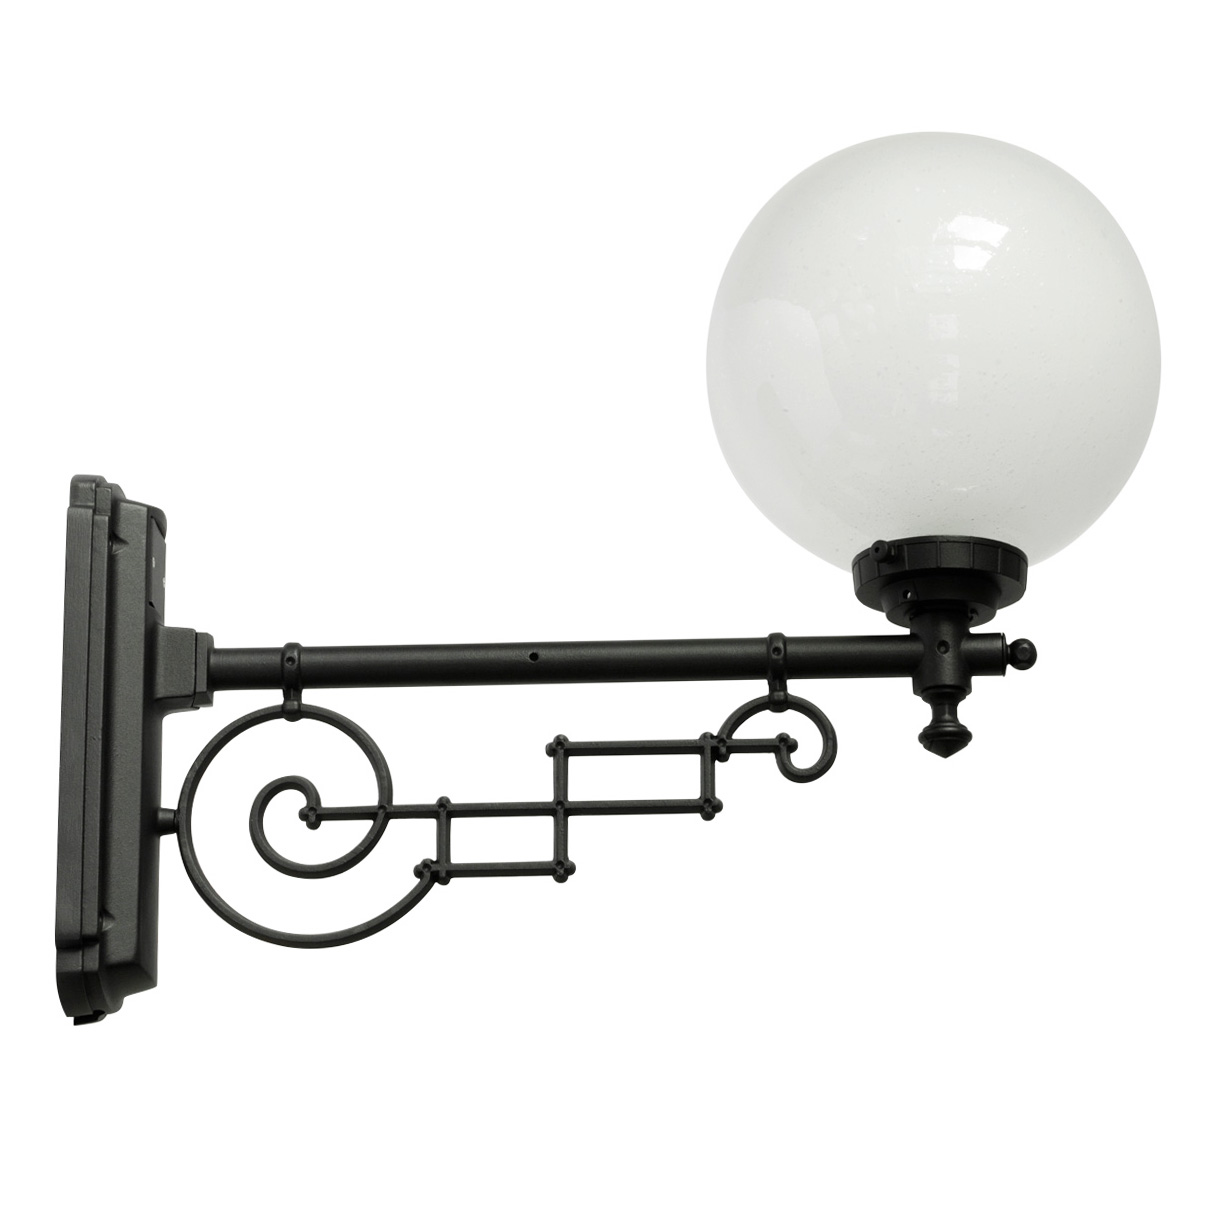 Large historical wall lamp with glass ball